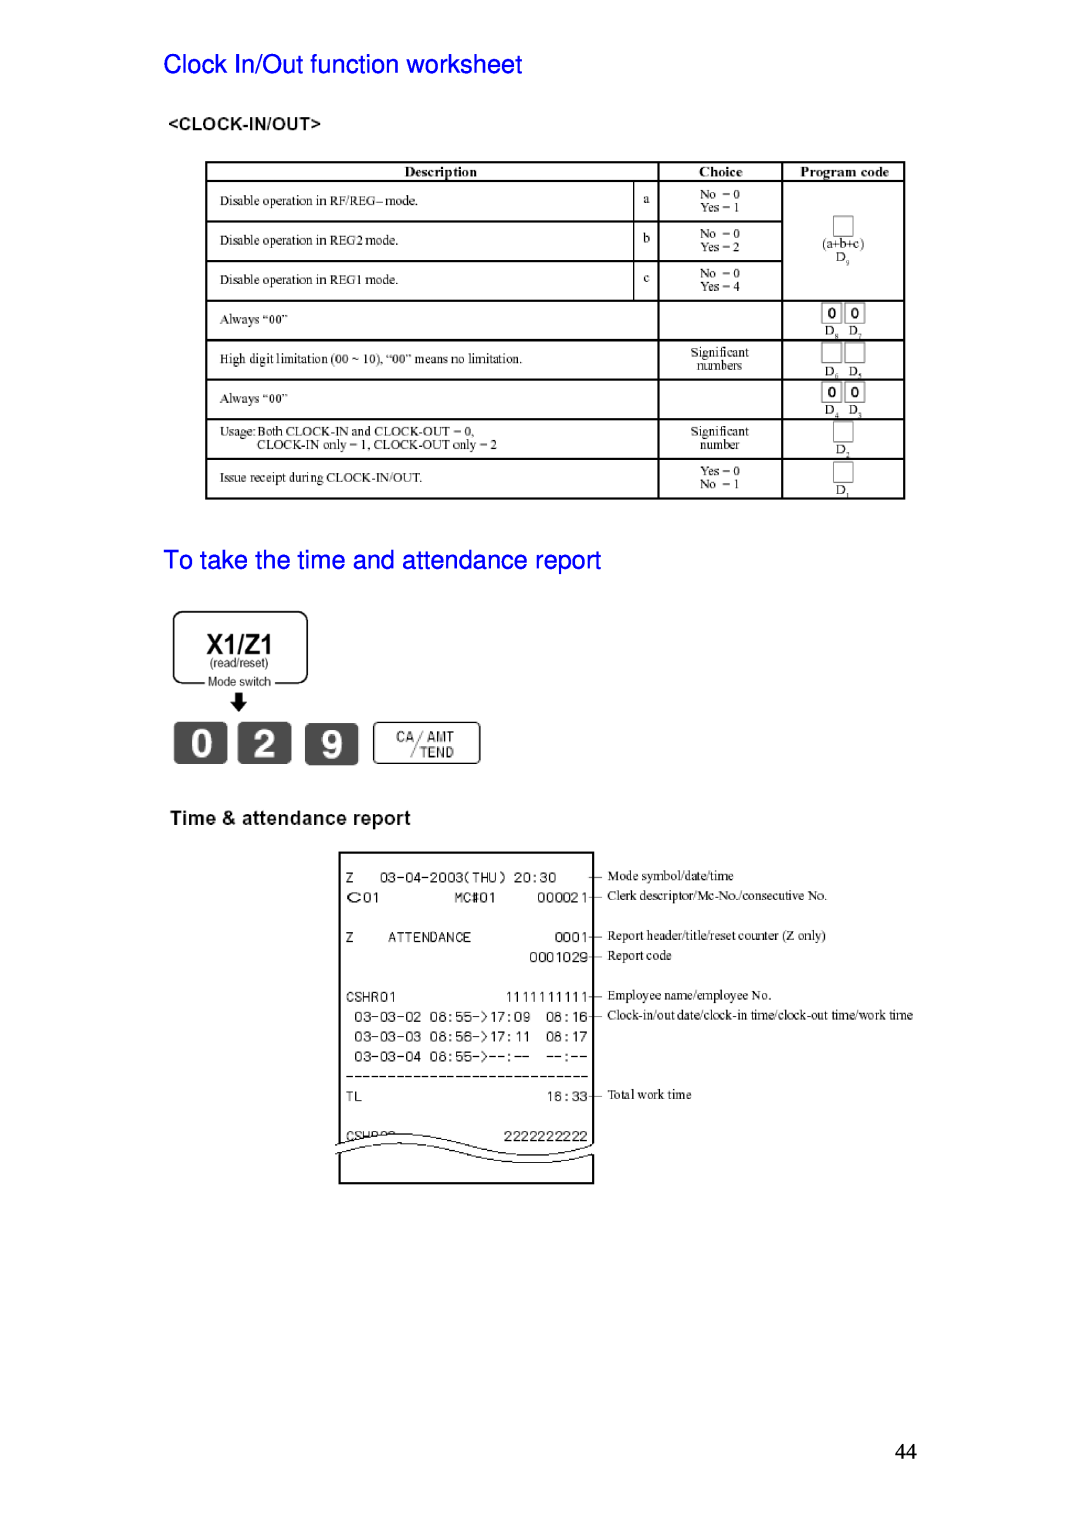 Delta TE-4000 manual Clock In/Out function worksheet, To take the time and attendance report 